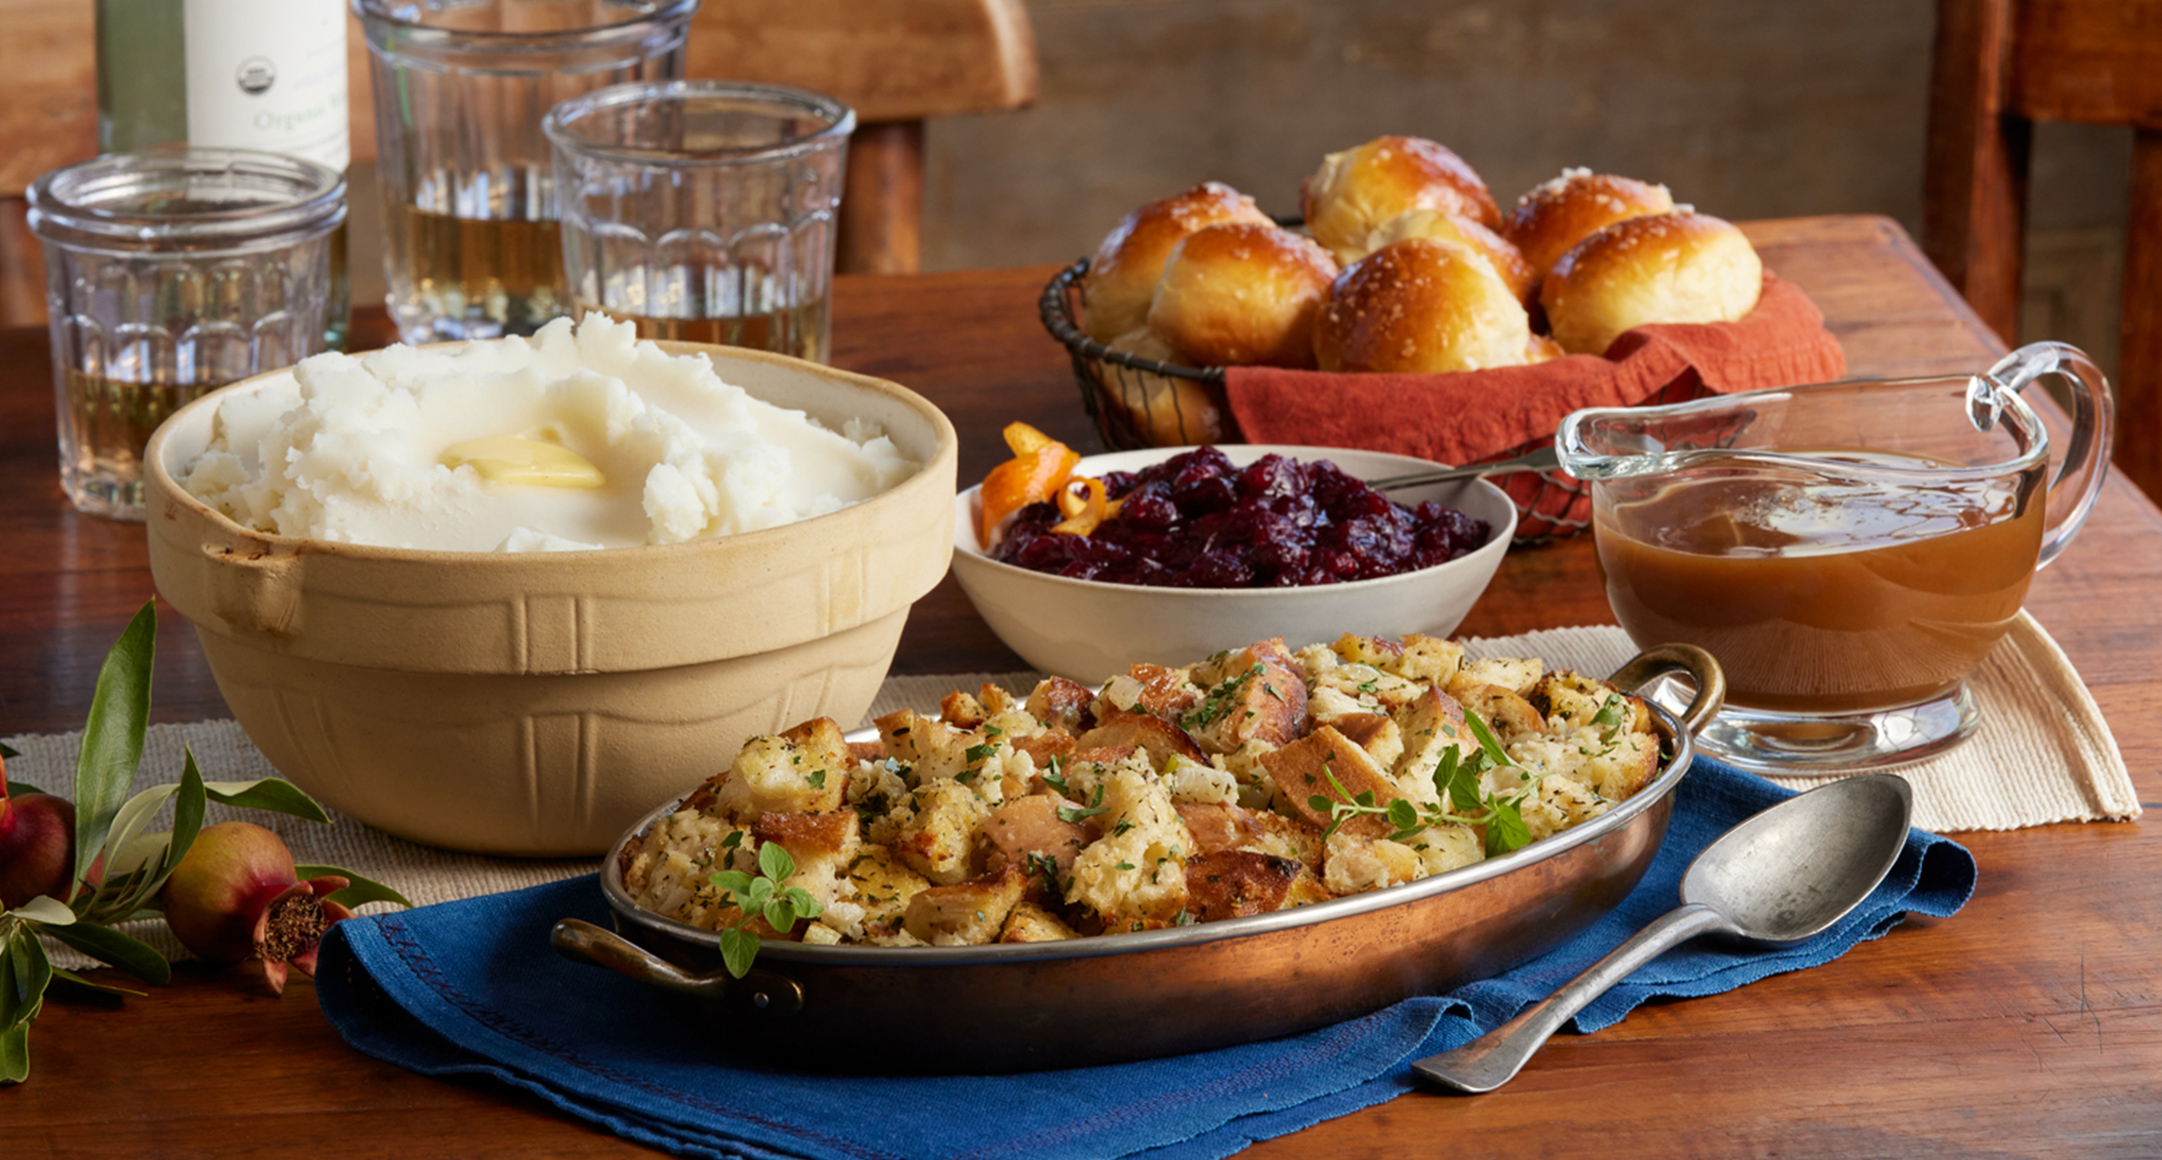 A festive holiday table with ready-to-eat sides, including mac & cheese, roasted Brussel sprouts, and mashed sweet potatoes.